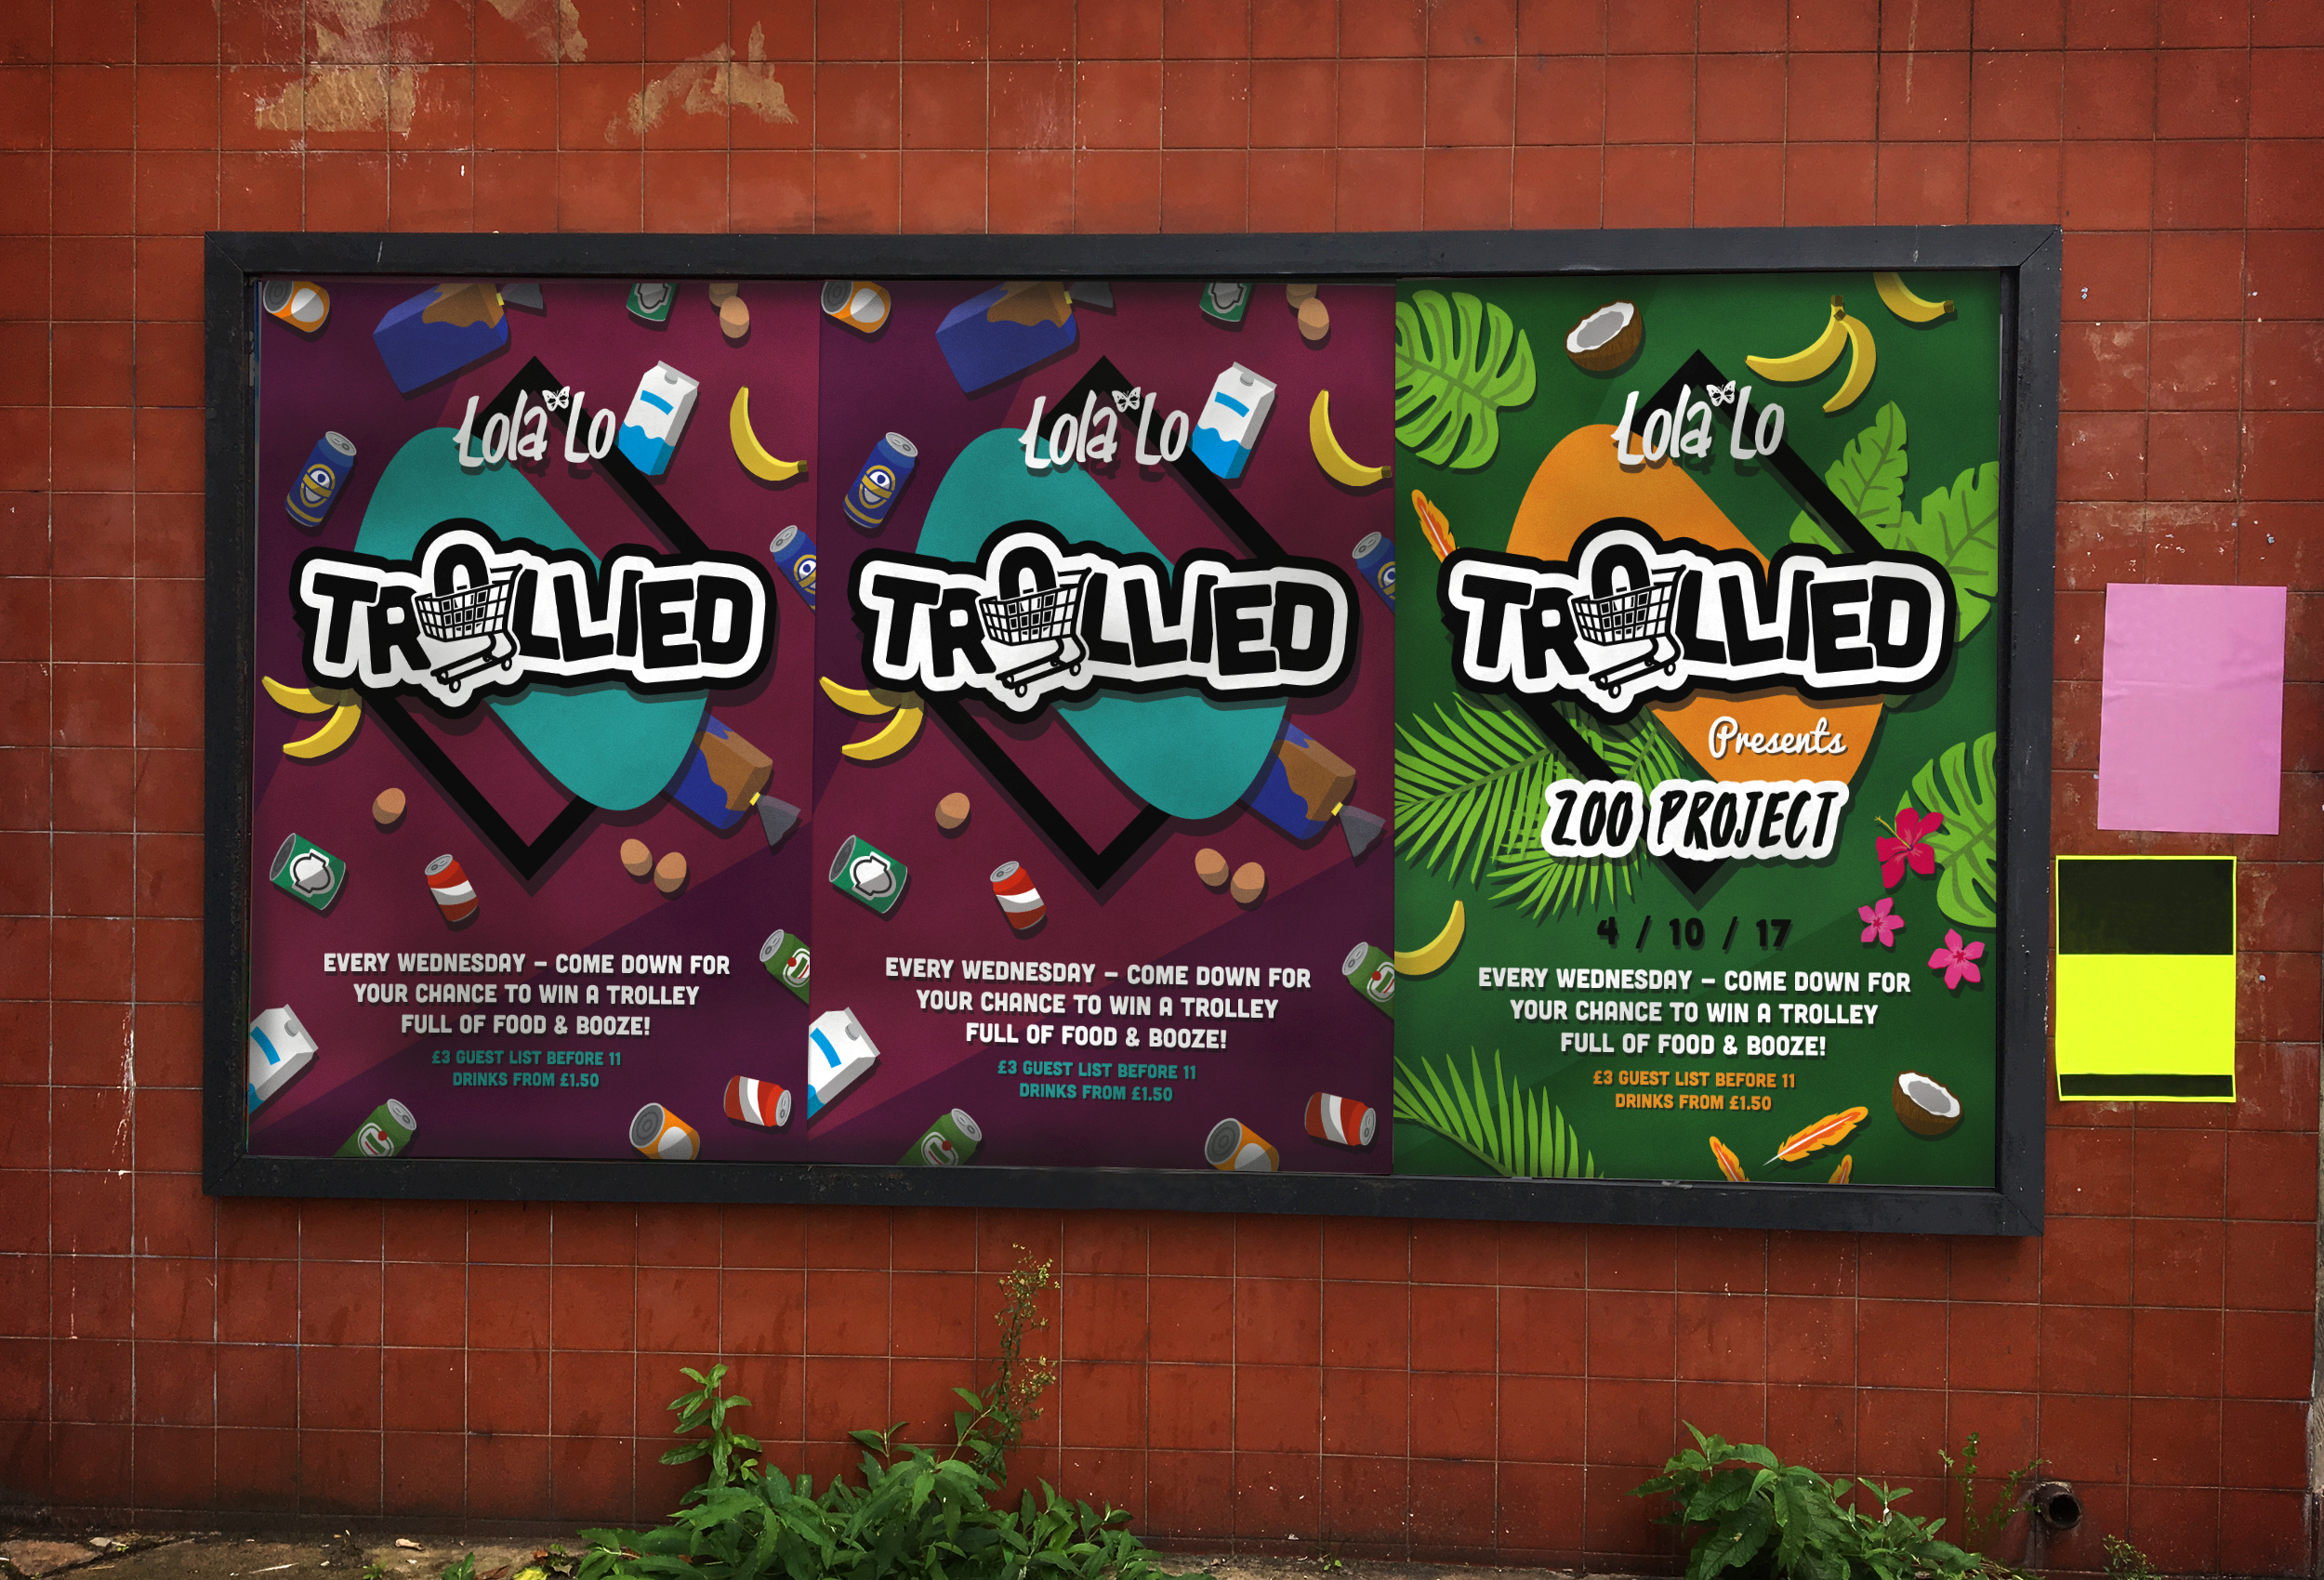 Trollied poster designs.